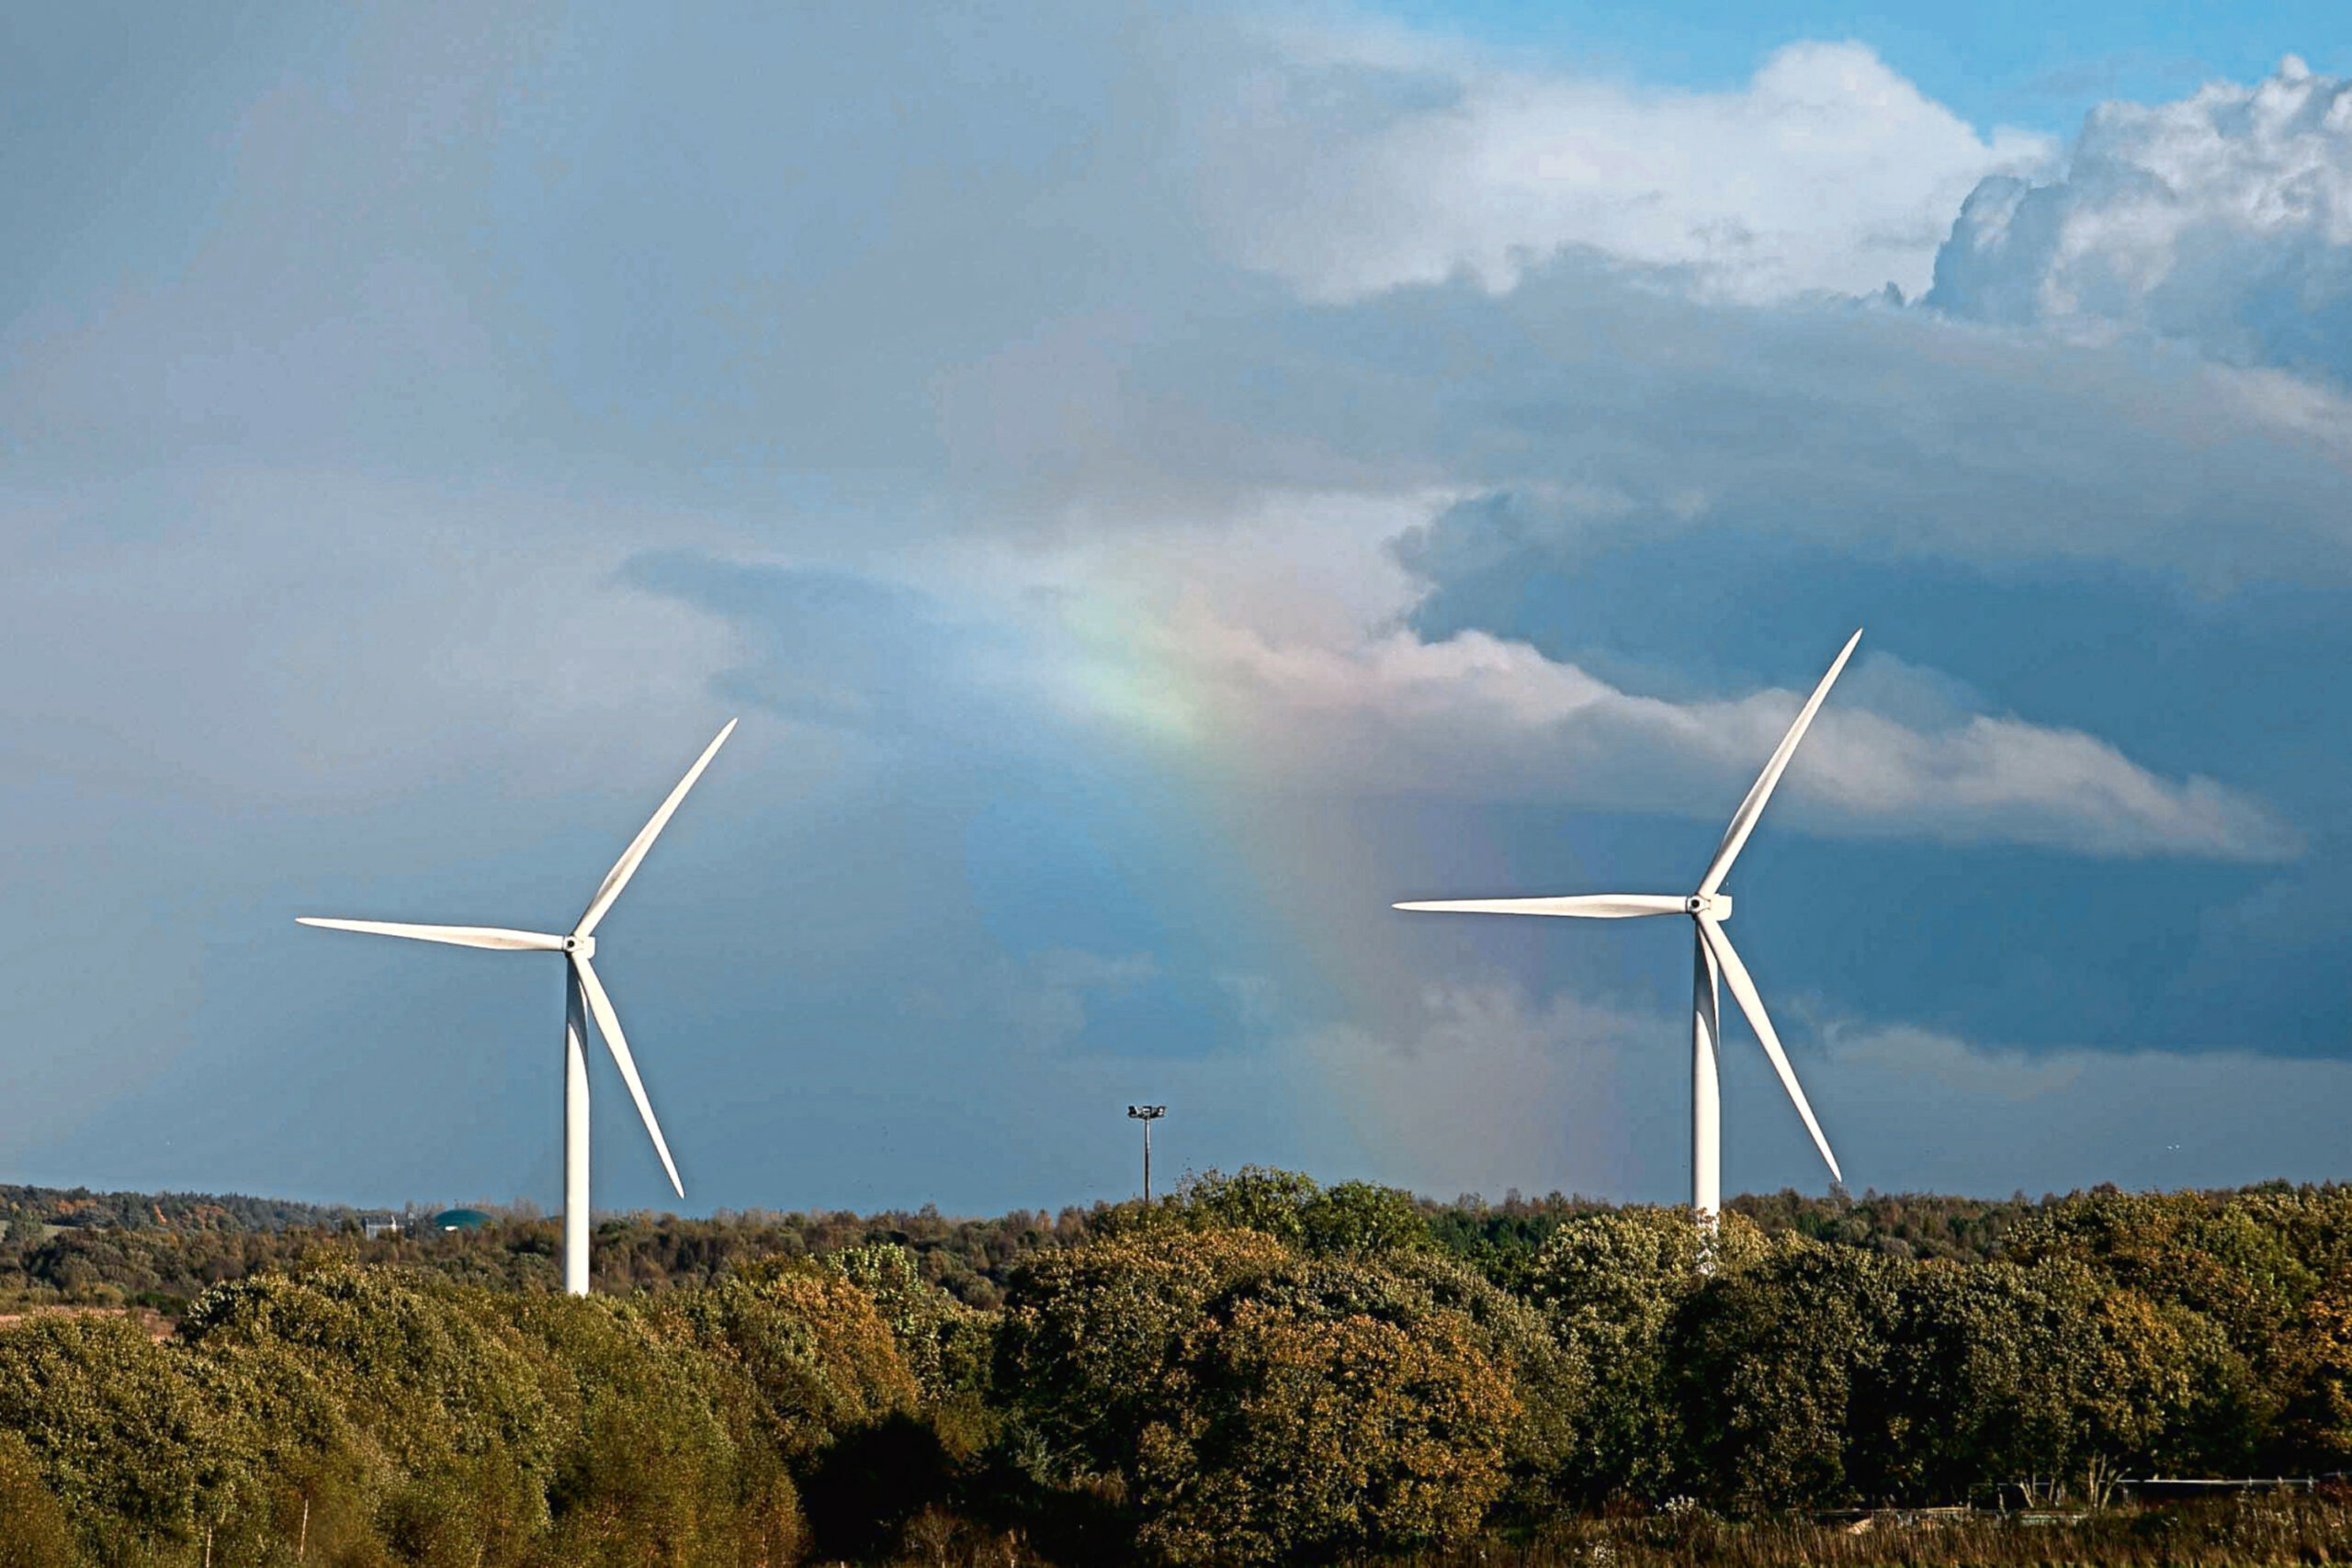 Many believe renewable energy is the way forward for Scotland